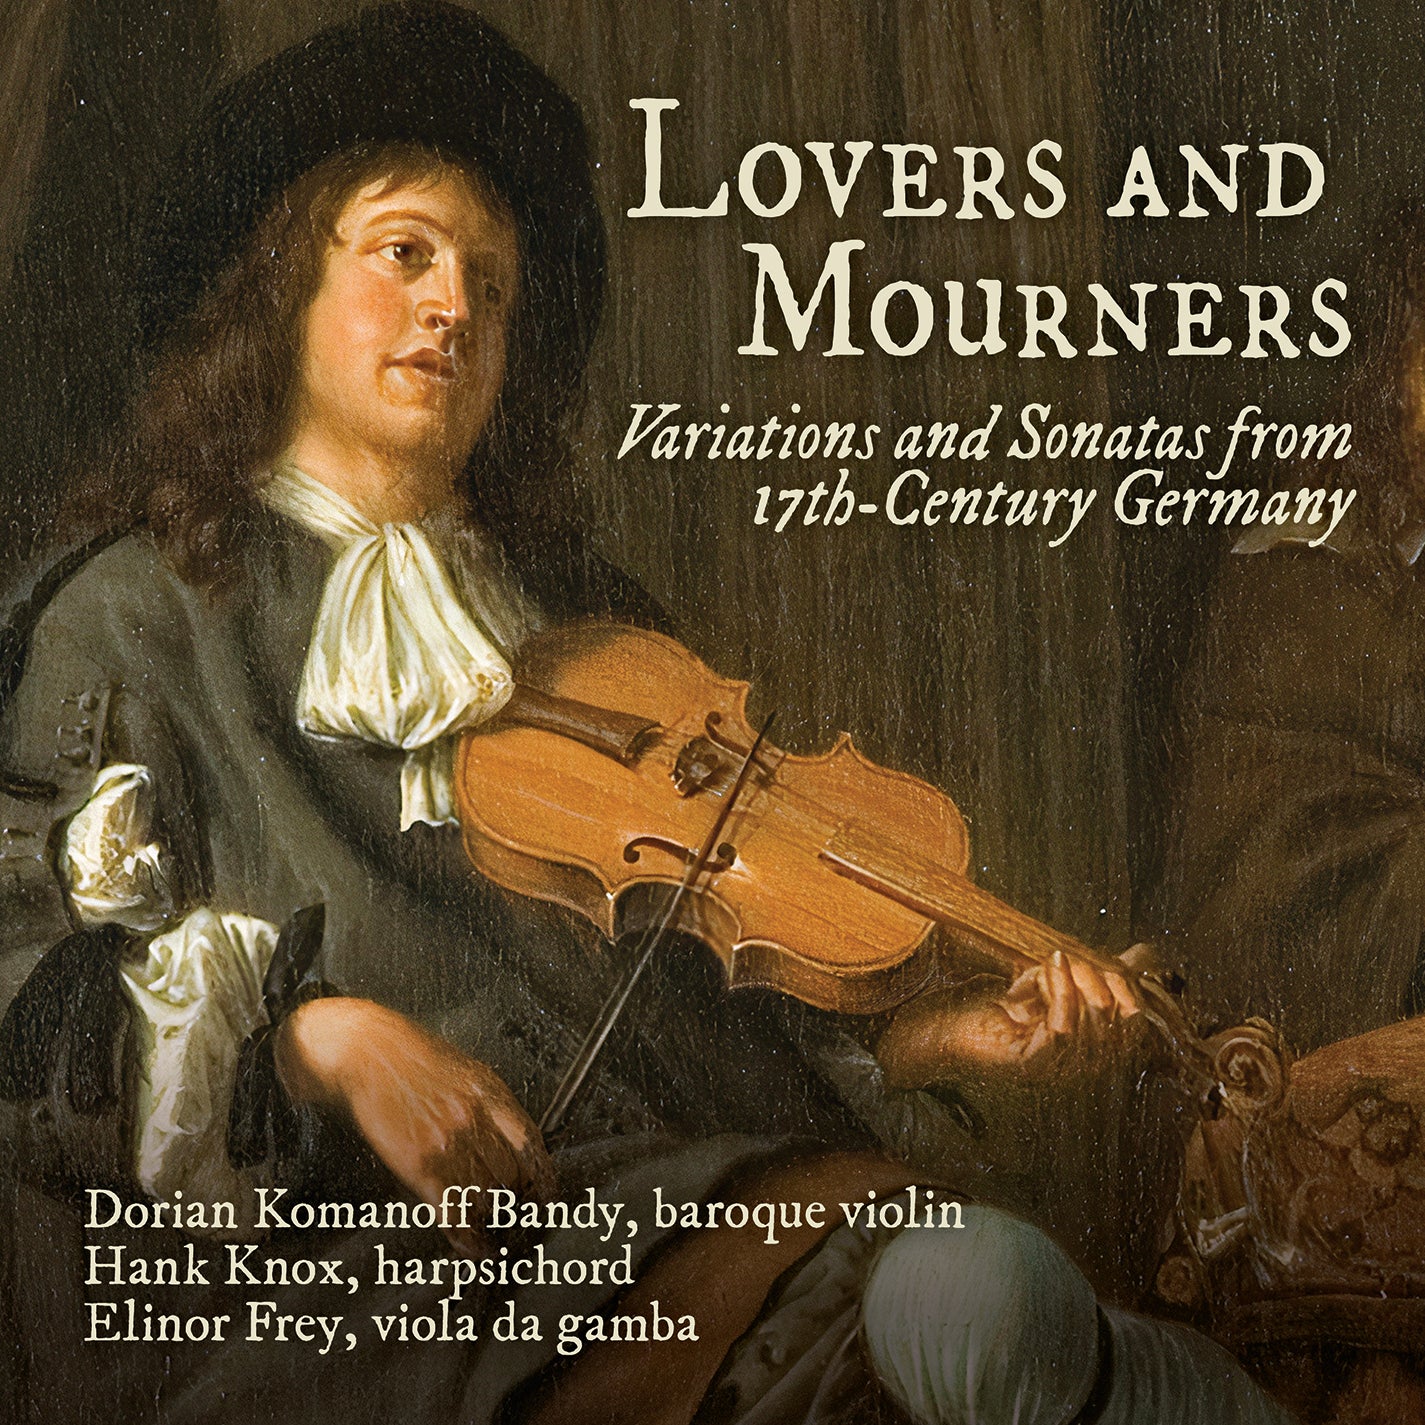 Lovers & Mourners - Variations & Sonatas from 1600s Germany / D.K. Bandy, Knox, Frey